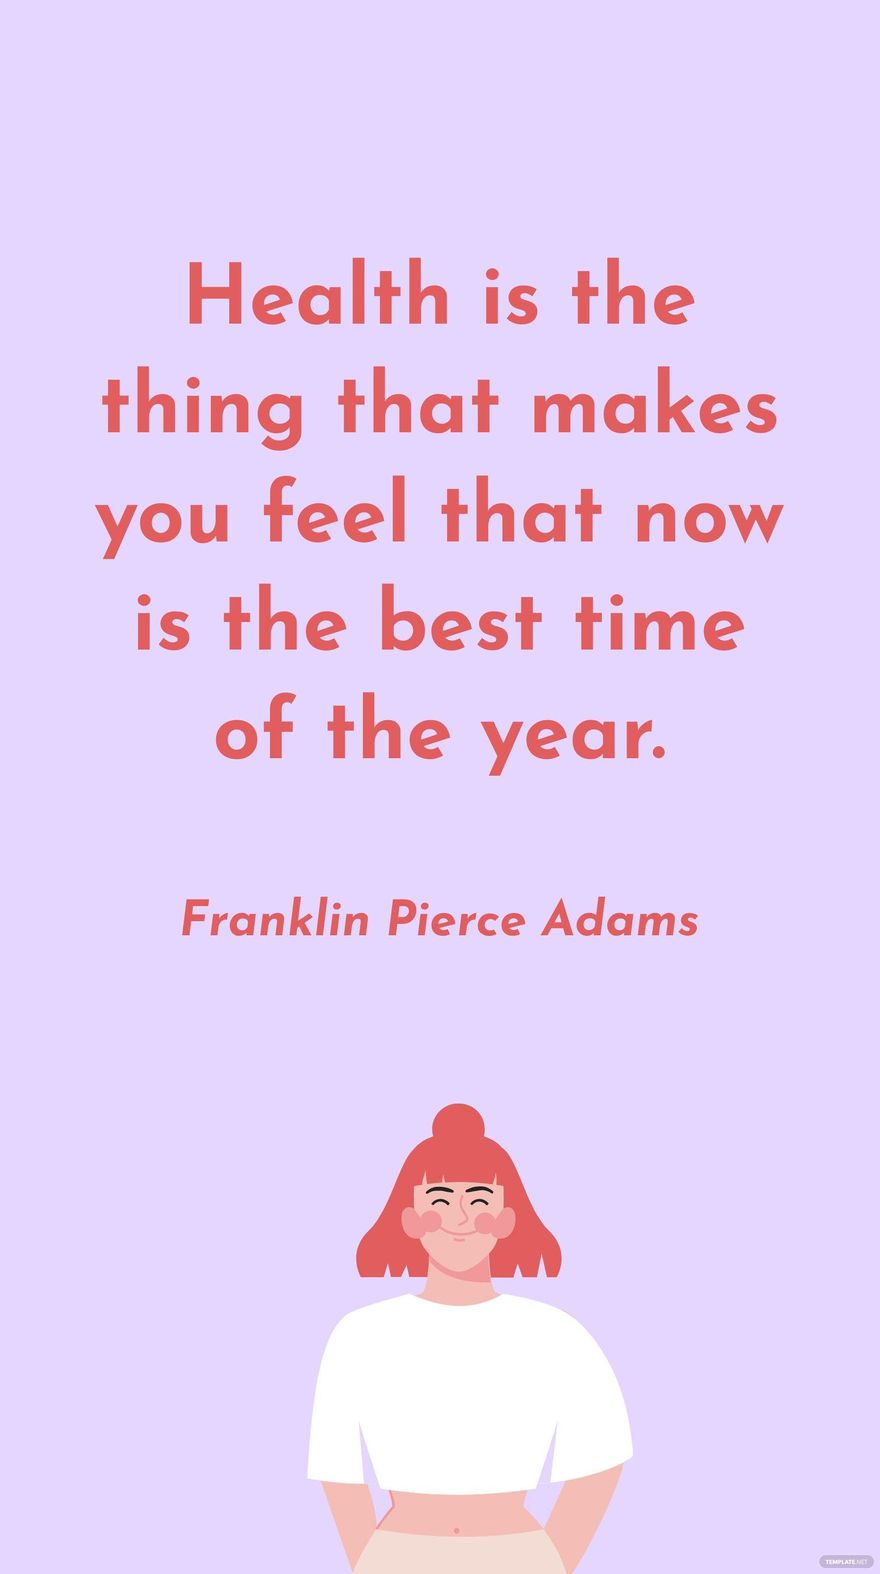 Free Franklin Pierce Adams - Health is the thing that makes you feel that now is the best time of the year. in JPG